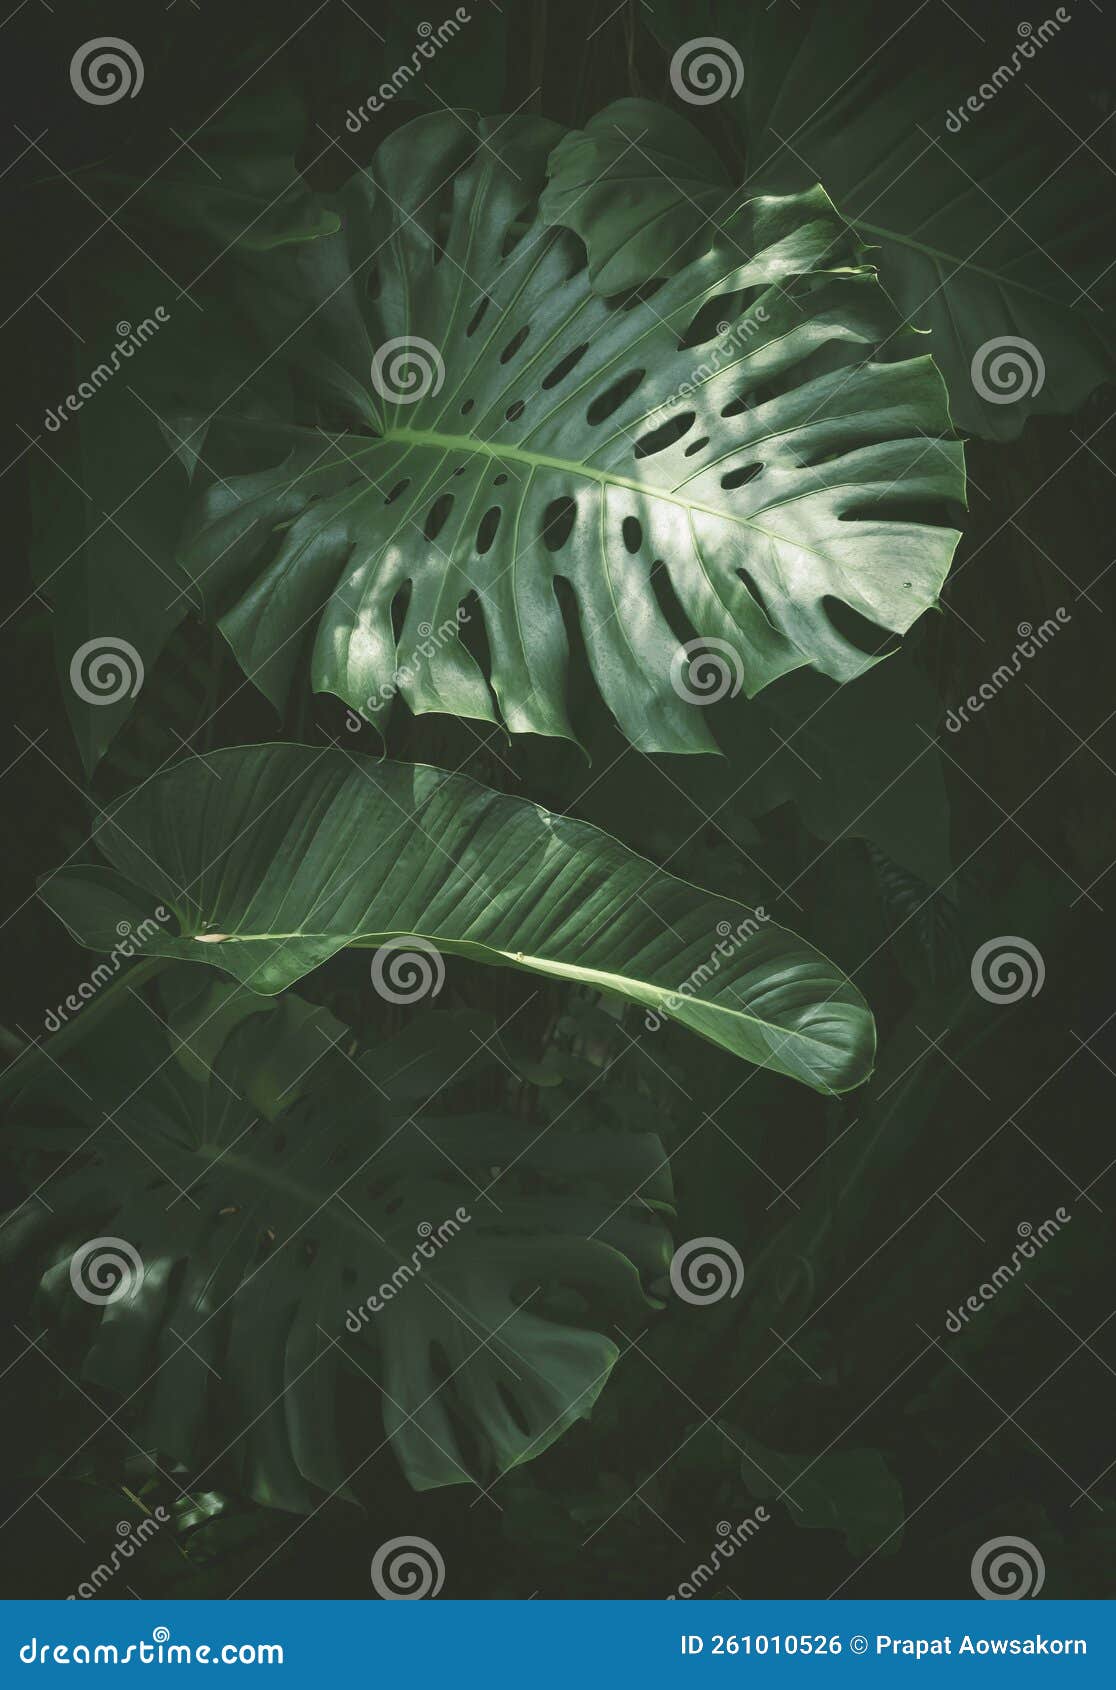 sunlight and shade on surface of jungle monstera leaves with green plants are growing in botanical garden